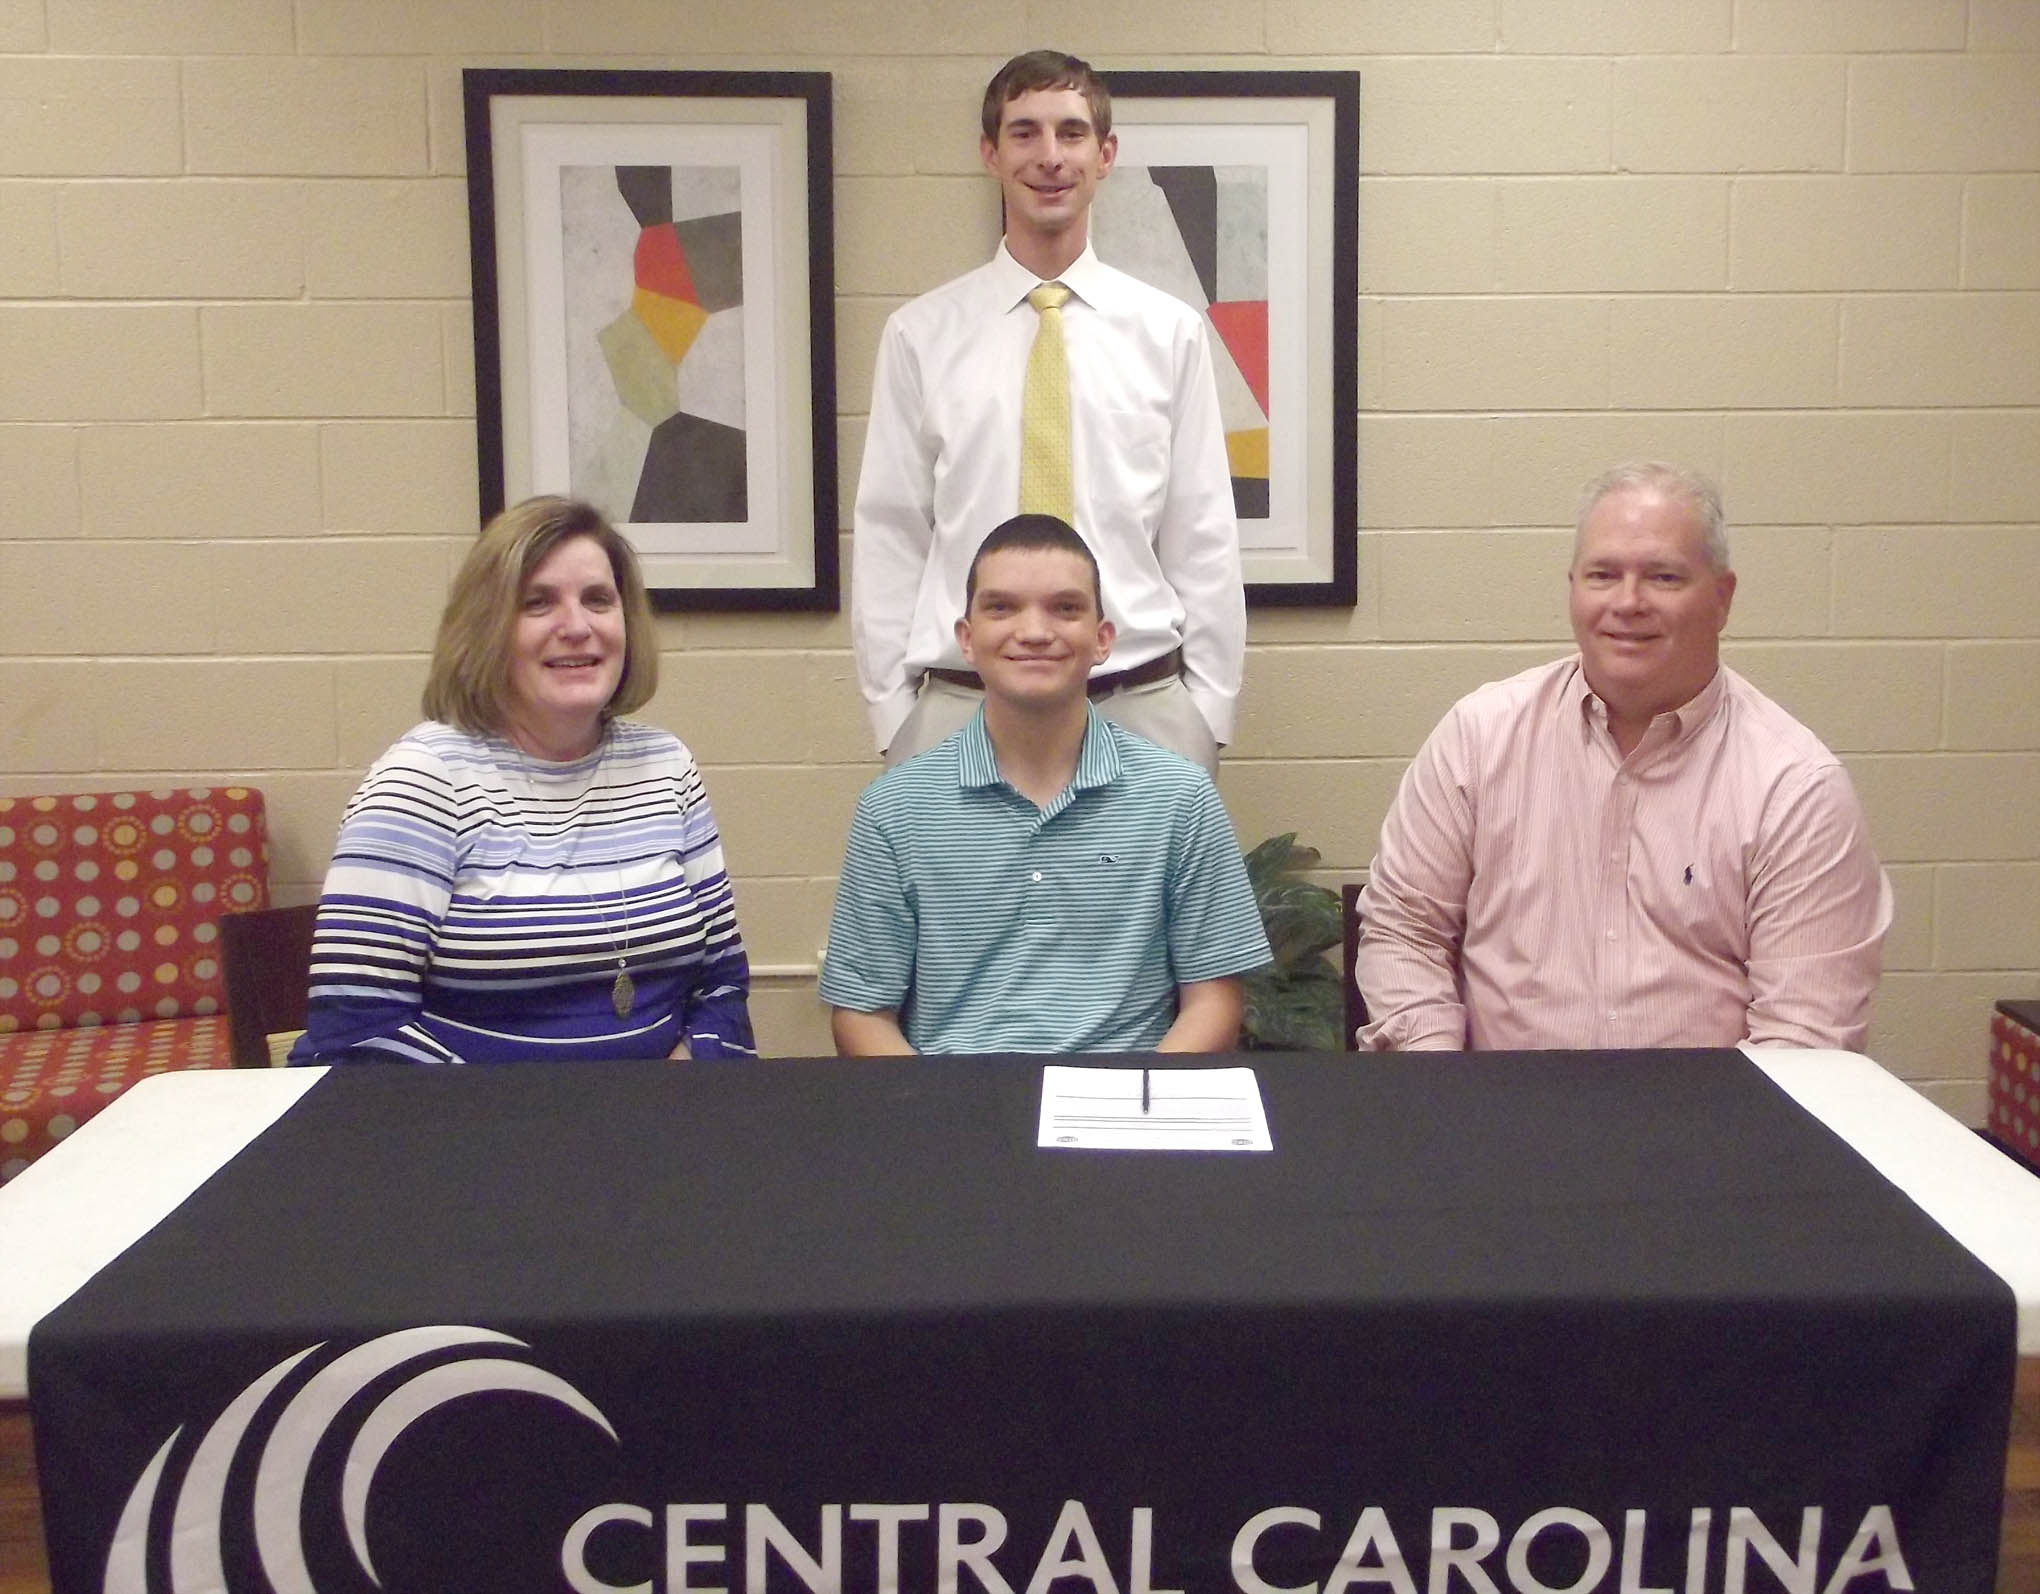 Click to enlarge,  Justin Minter (seated, center) has signed to join next year's Central Carolina Community College men's golf team. He has played golf for four years at Southern Lee High School in Sanford. "Justin is a great addition to our program," said CCCC Golf Coach Jonathan Hockaday (standing). Justin is pictured with his parents, Lisa and Ronald Minter. 